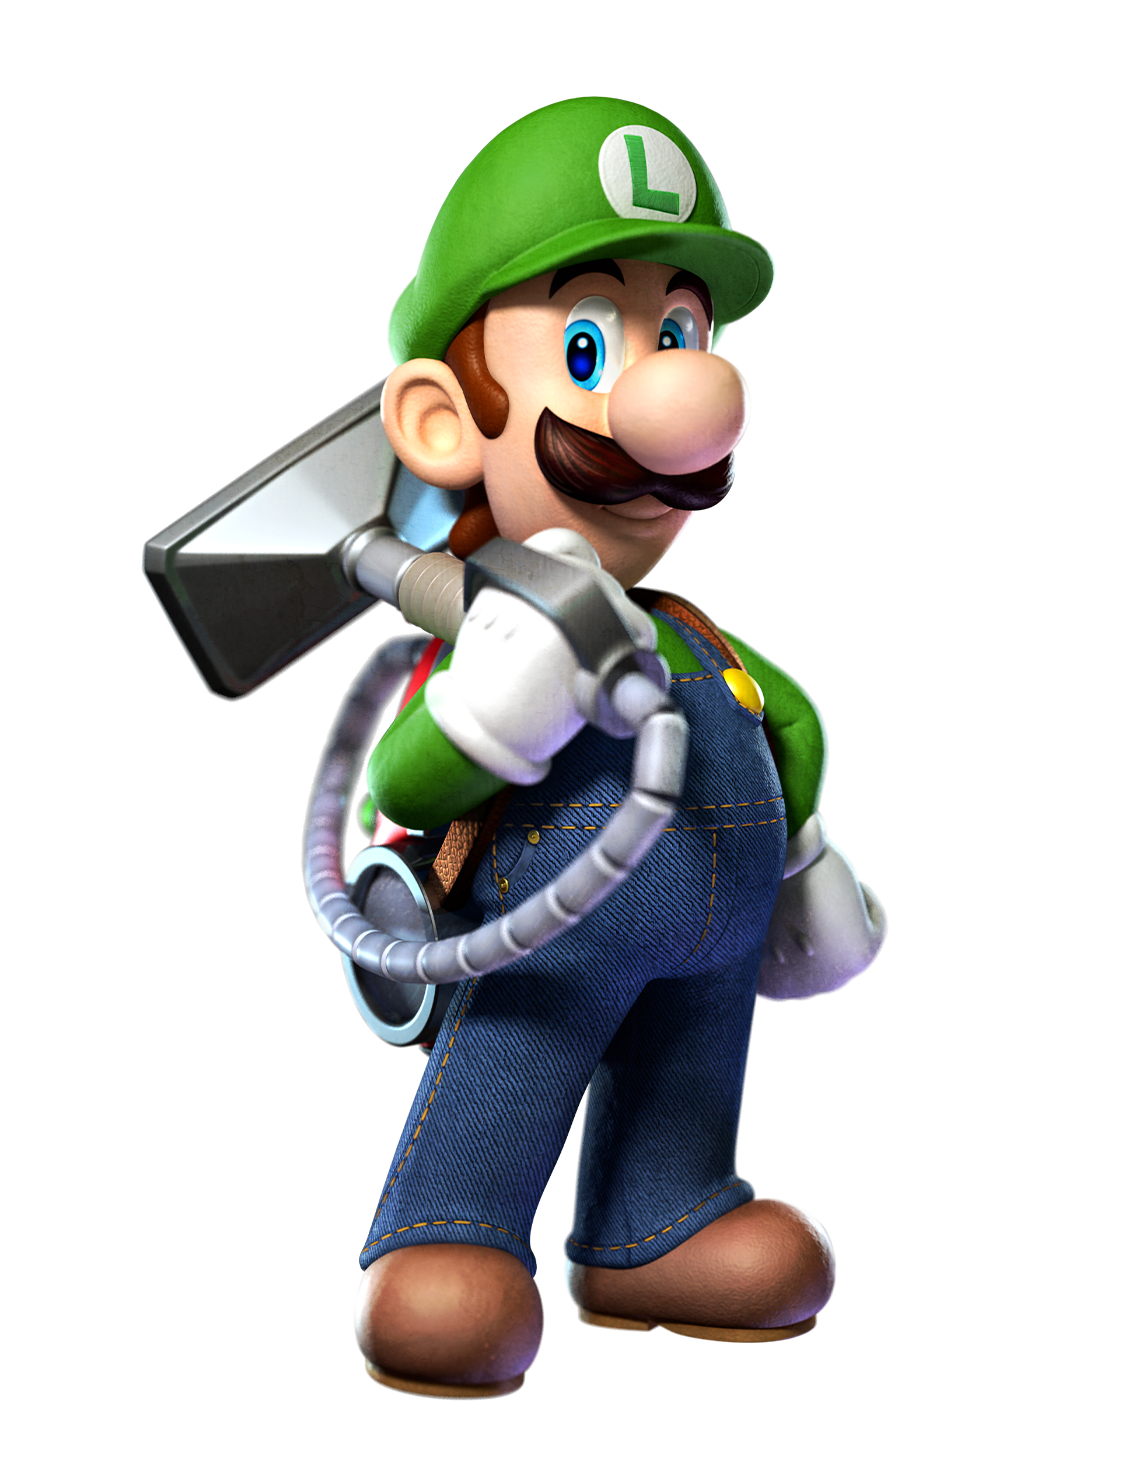 Luigi poses heroically with the handle of the Poltergust 5000 resting on his shoulder.